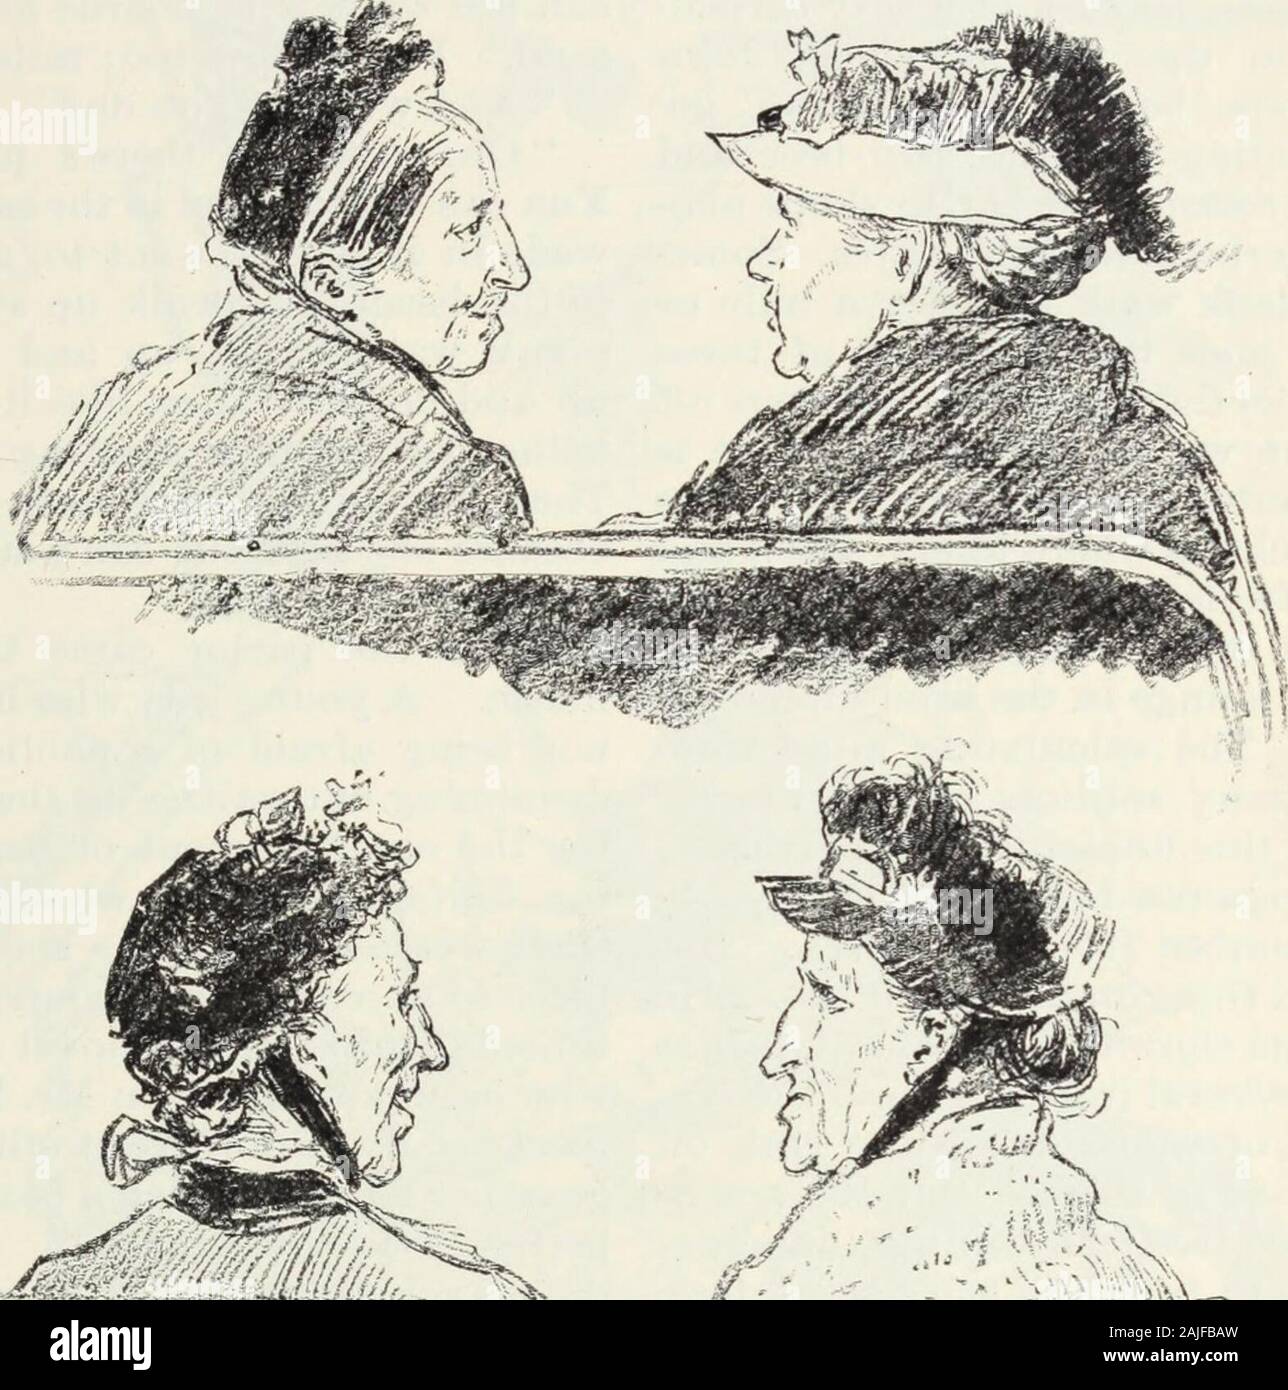 Harper's New Monthly Magazine Volume 34 December 1886 to May 1887 . inholiday market costumes, strong-featured,positive, Avho shook their heads at eachother and jiodded violently and incessant-ly, and all talked at once, the old men inrusty suits, thin, with a deprecatory man-ner, as if they had heard that clatter forfifty years, and perky, sharp-faced girls invegetable hats, all long-nosed and thin-lipped. And though the day was cool,mosquitoes had the bad taste to invade the THEIR PILGRIMAGE. 677 train. At the junction, a small collectionof wooden shanties, where the travellerswaited an hour Stock Photo